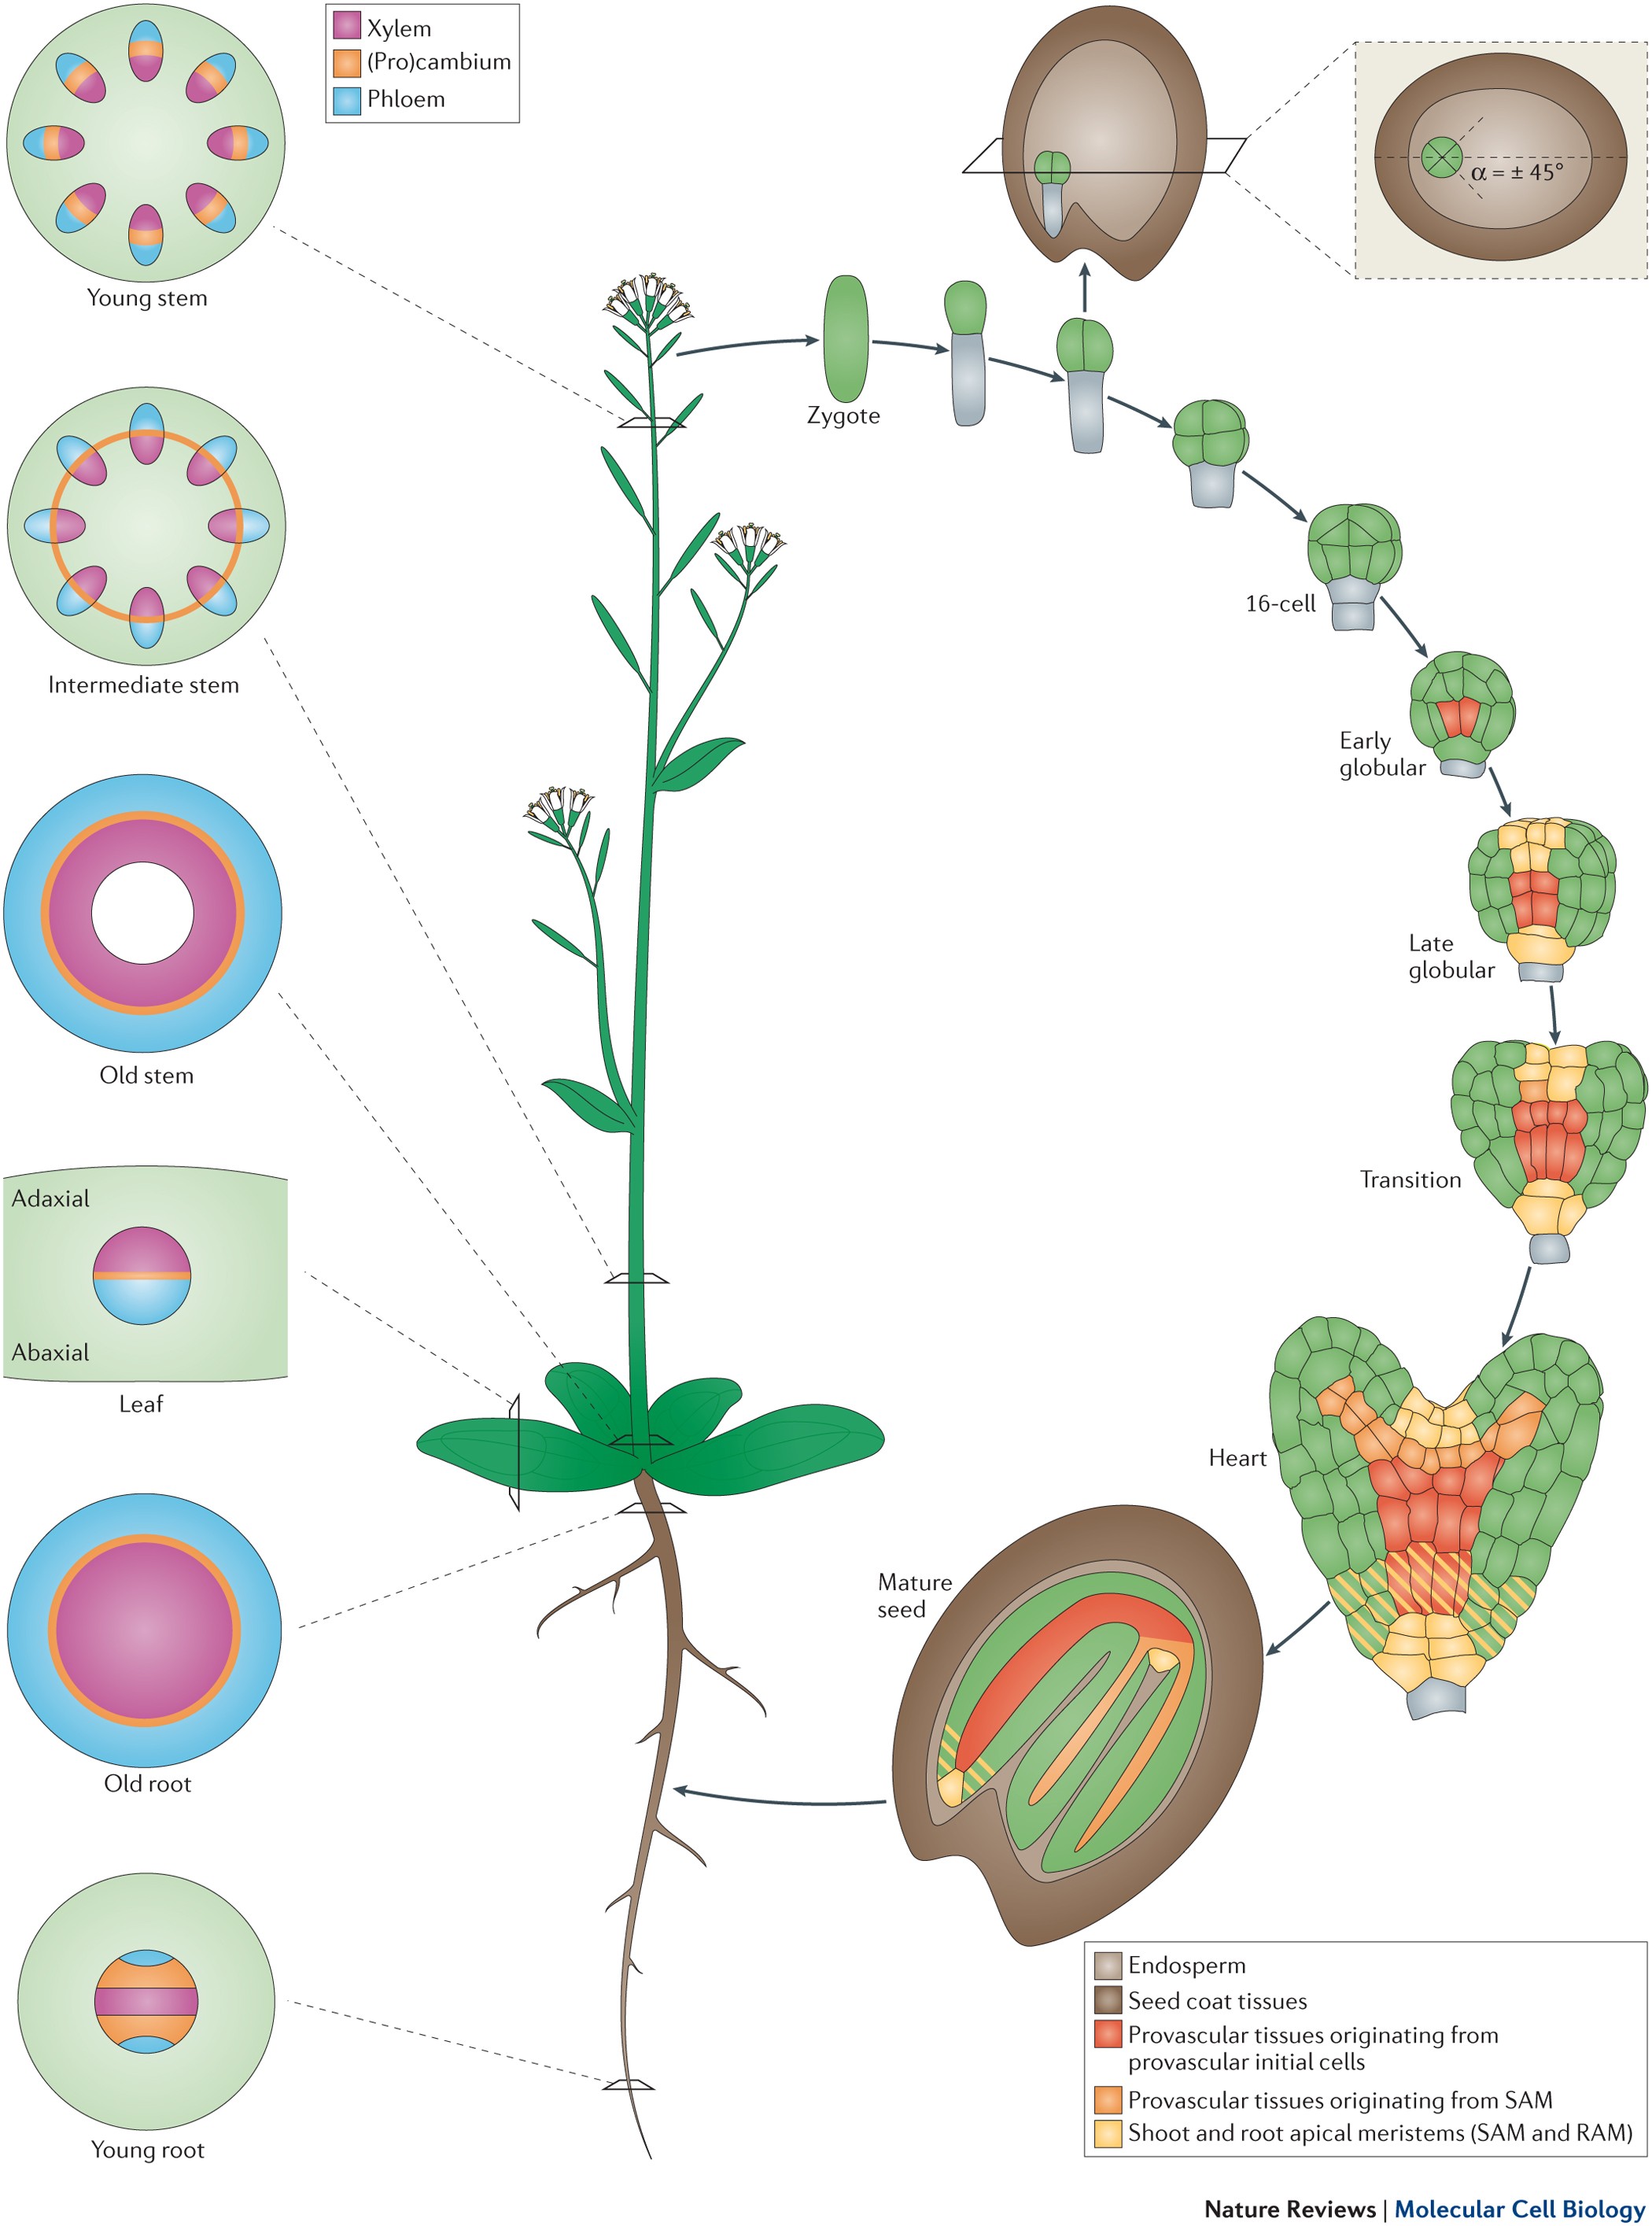 IV. Functions of Seed Coats in Plant Development